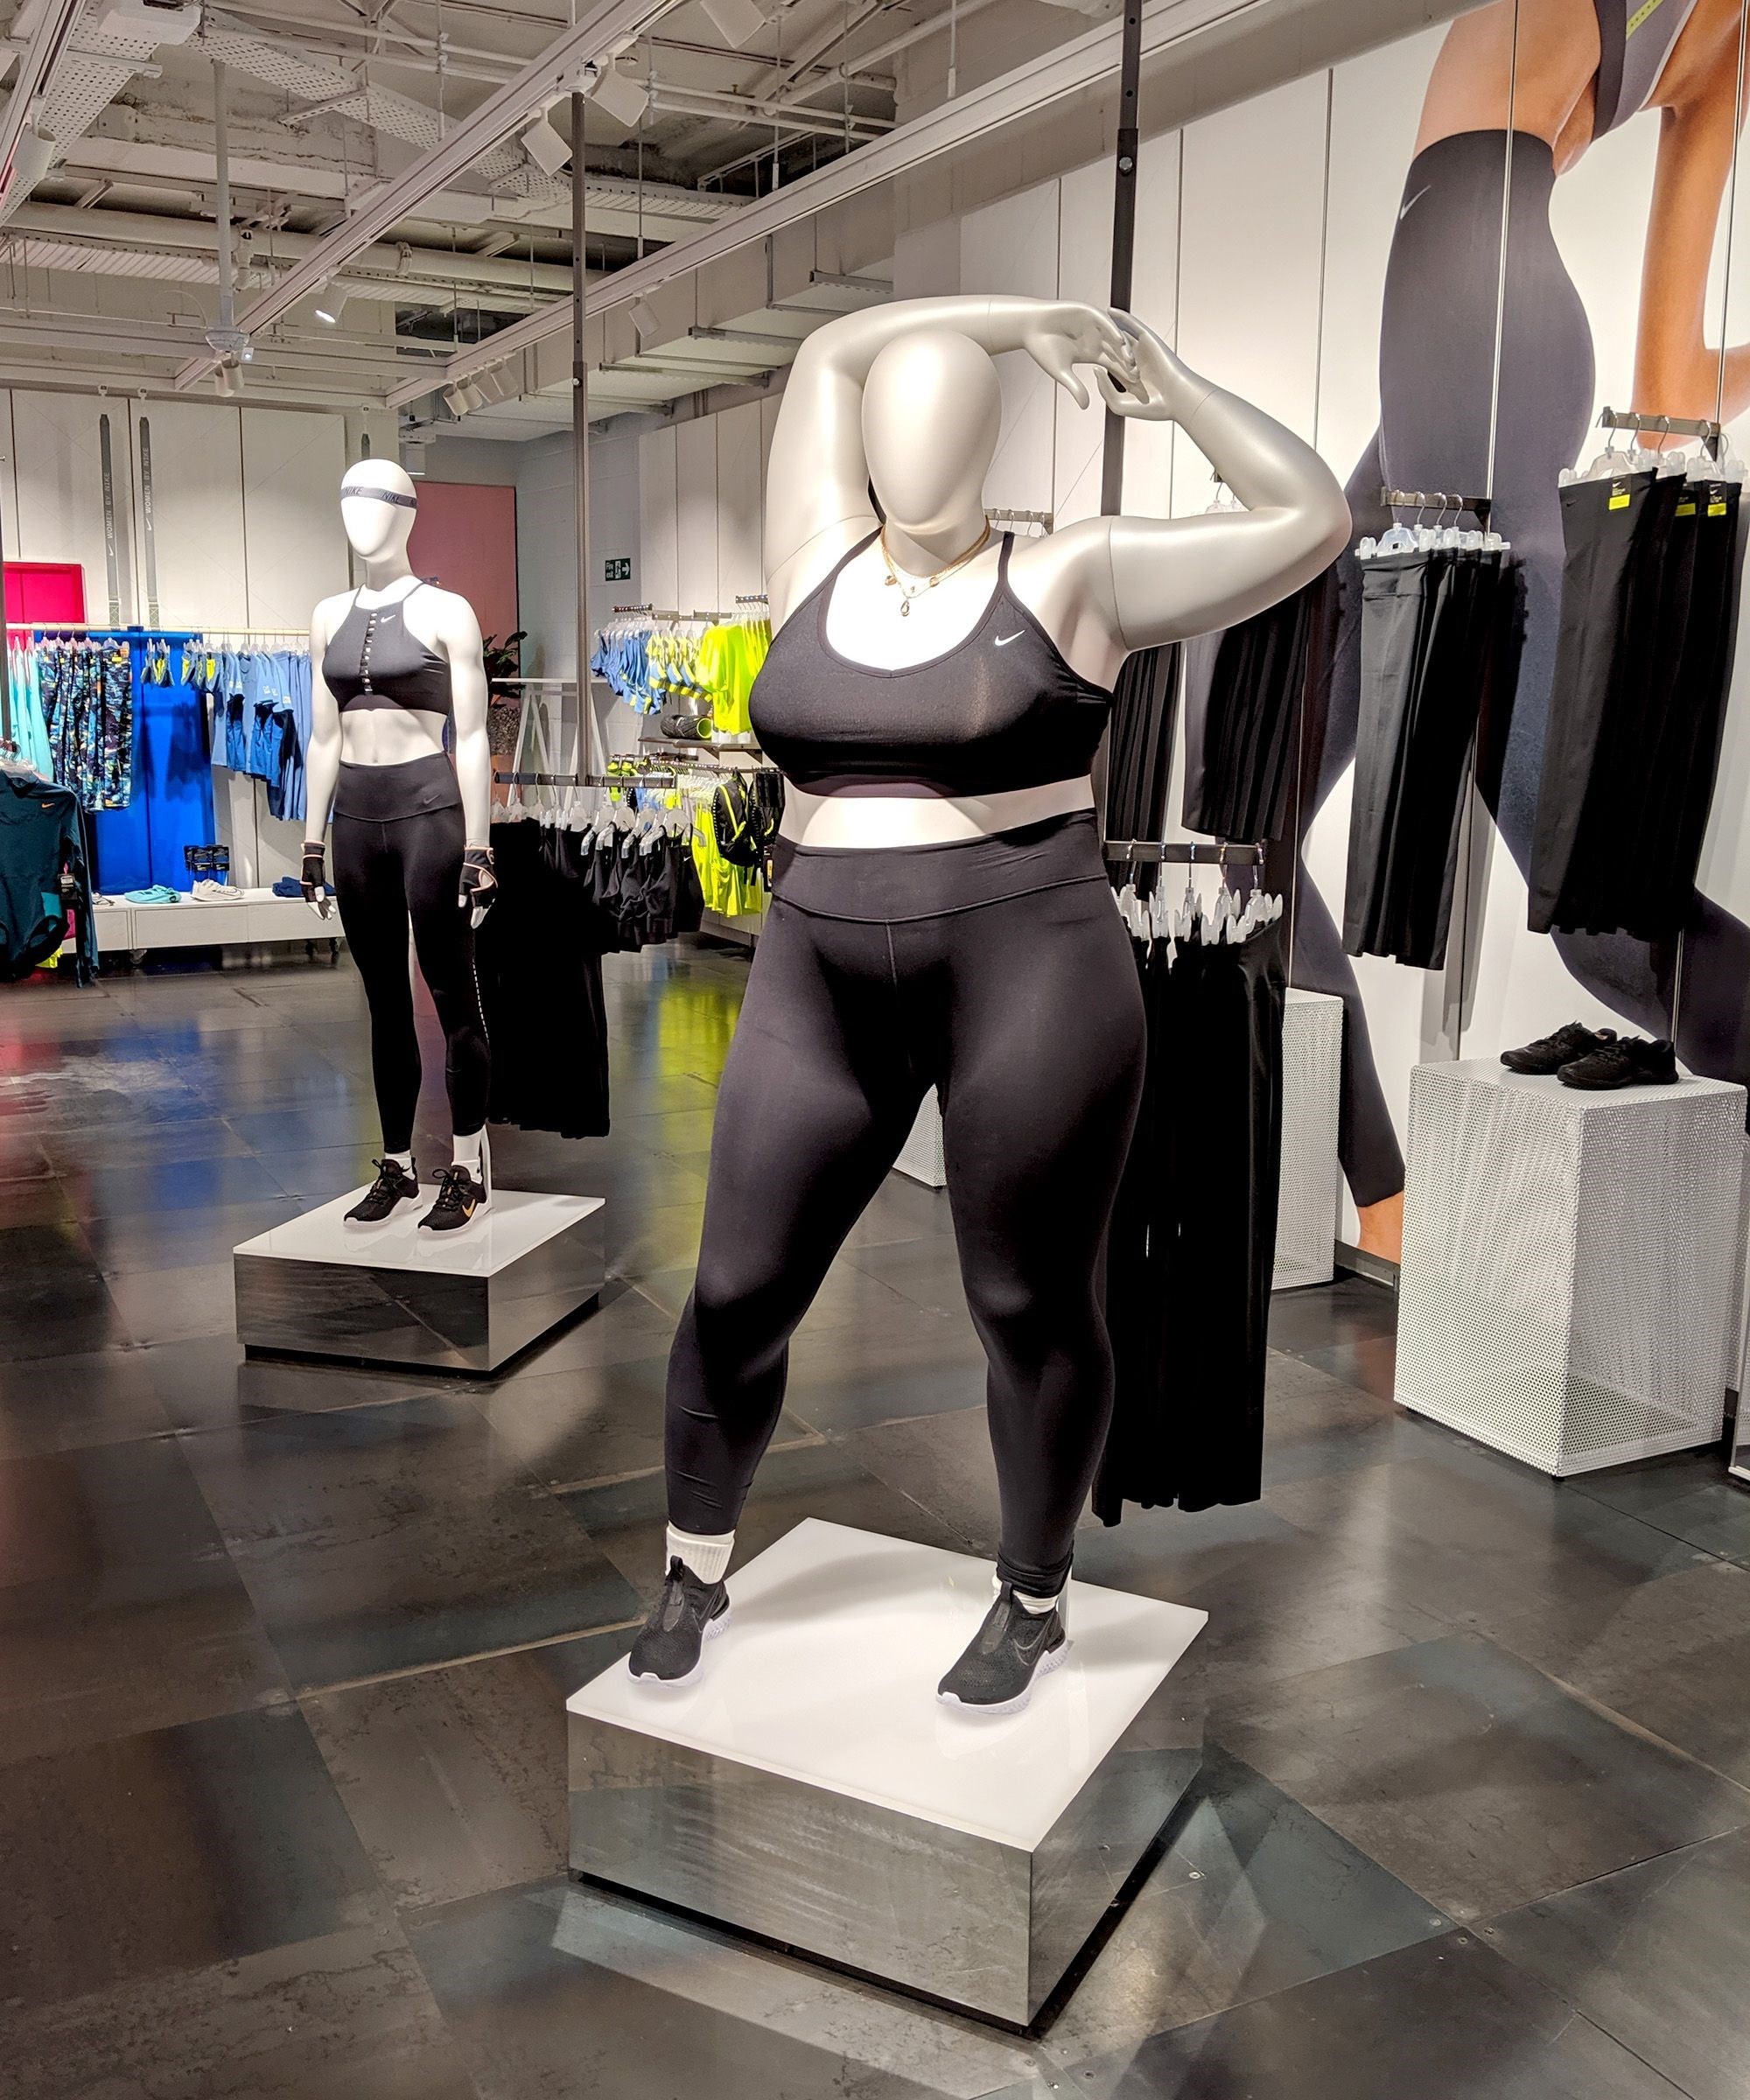 The sparks outrage over 'obese' mannequins article Dazed